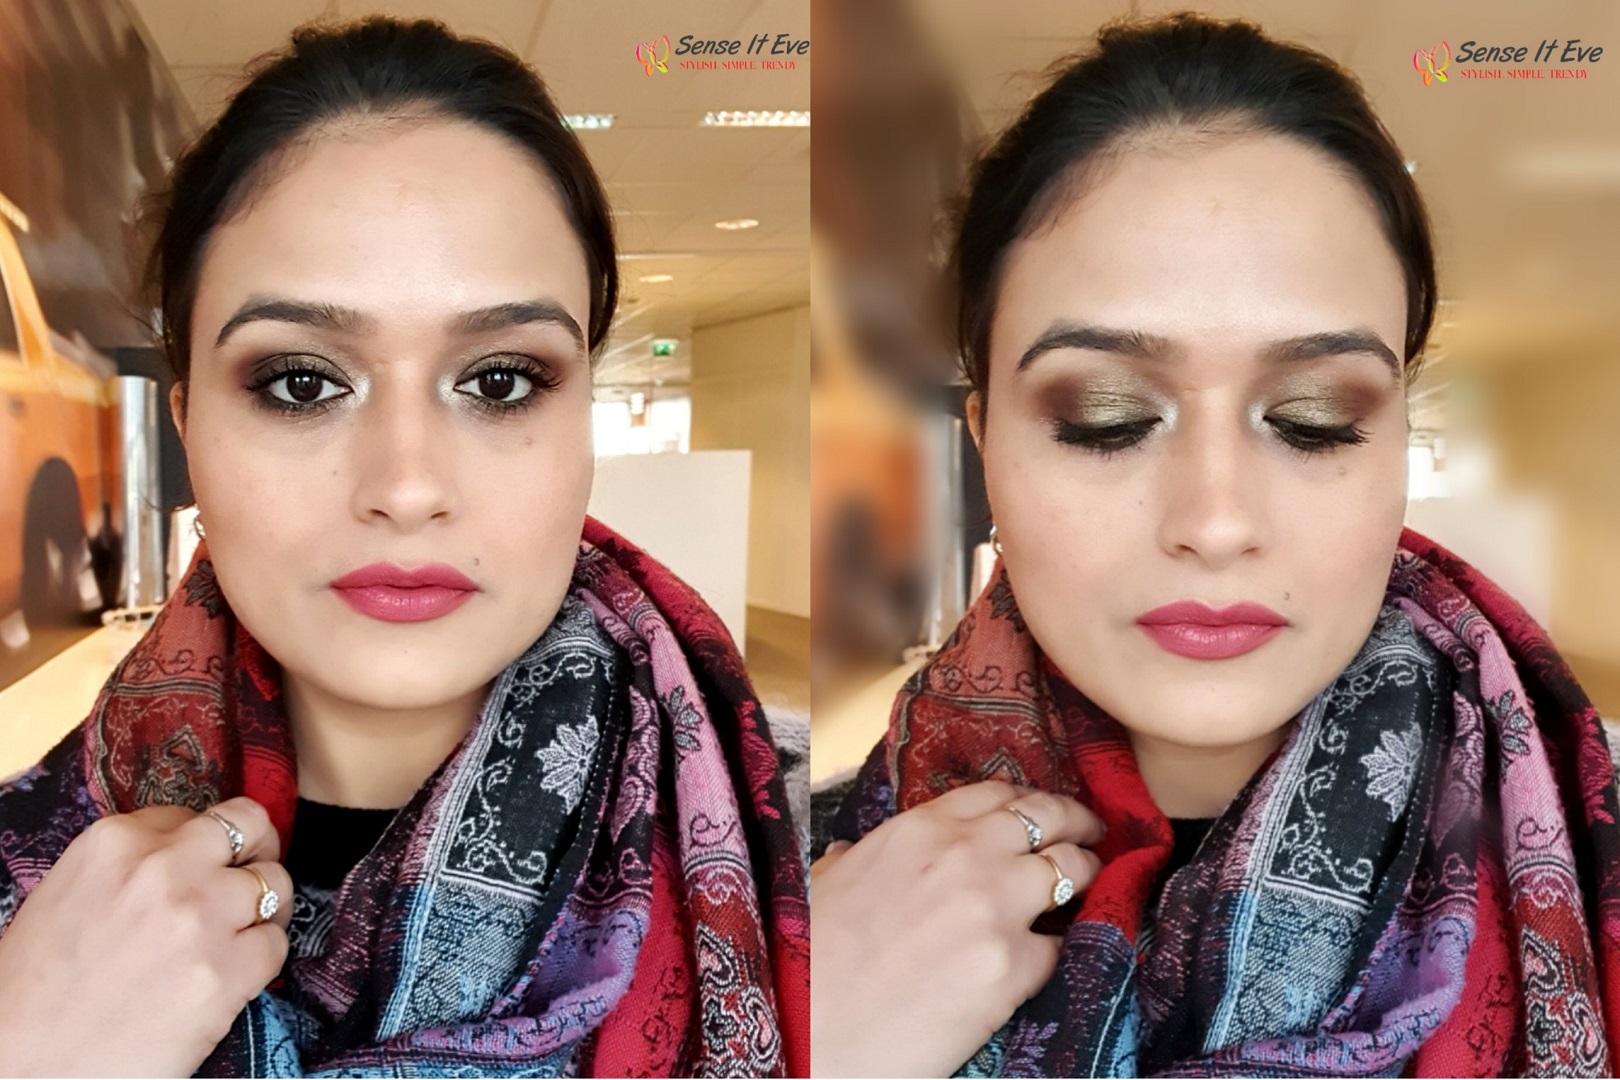 Lakme 9 to 5 Eyeshadow Quartet Tanjore Rush Makeup look 3 Sense It Eve Weighing Cosmetics And Confidence